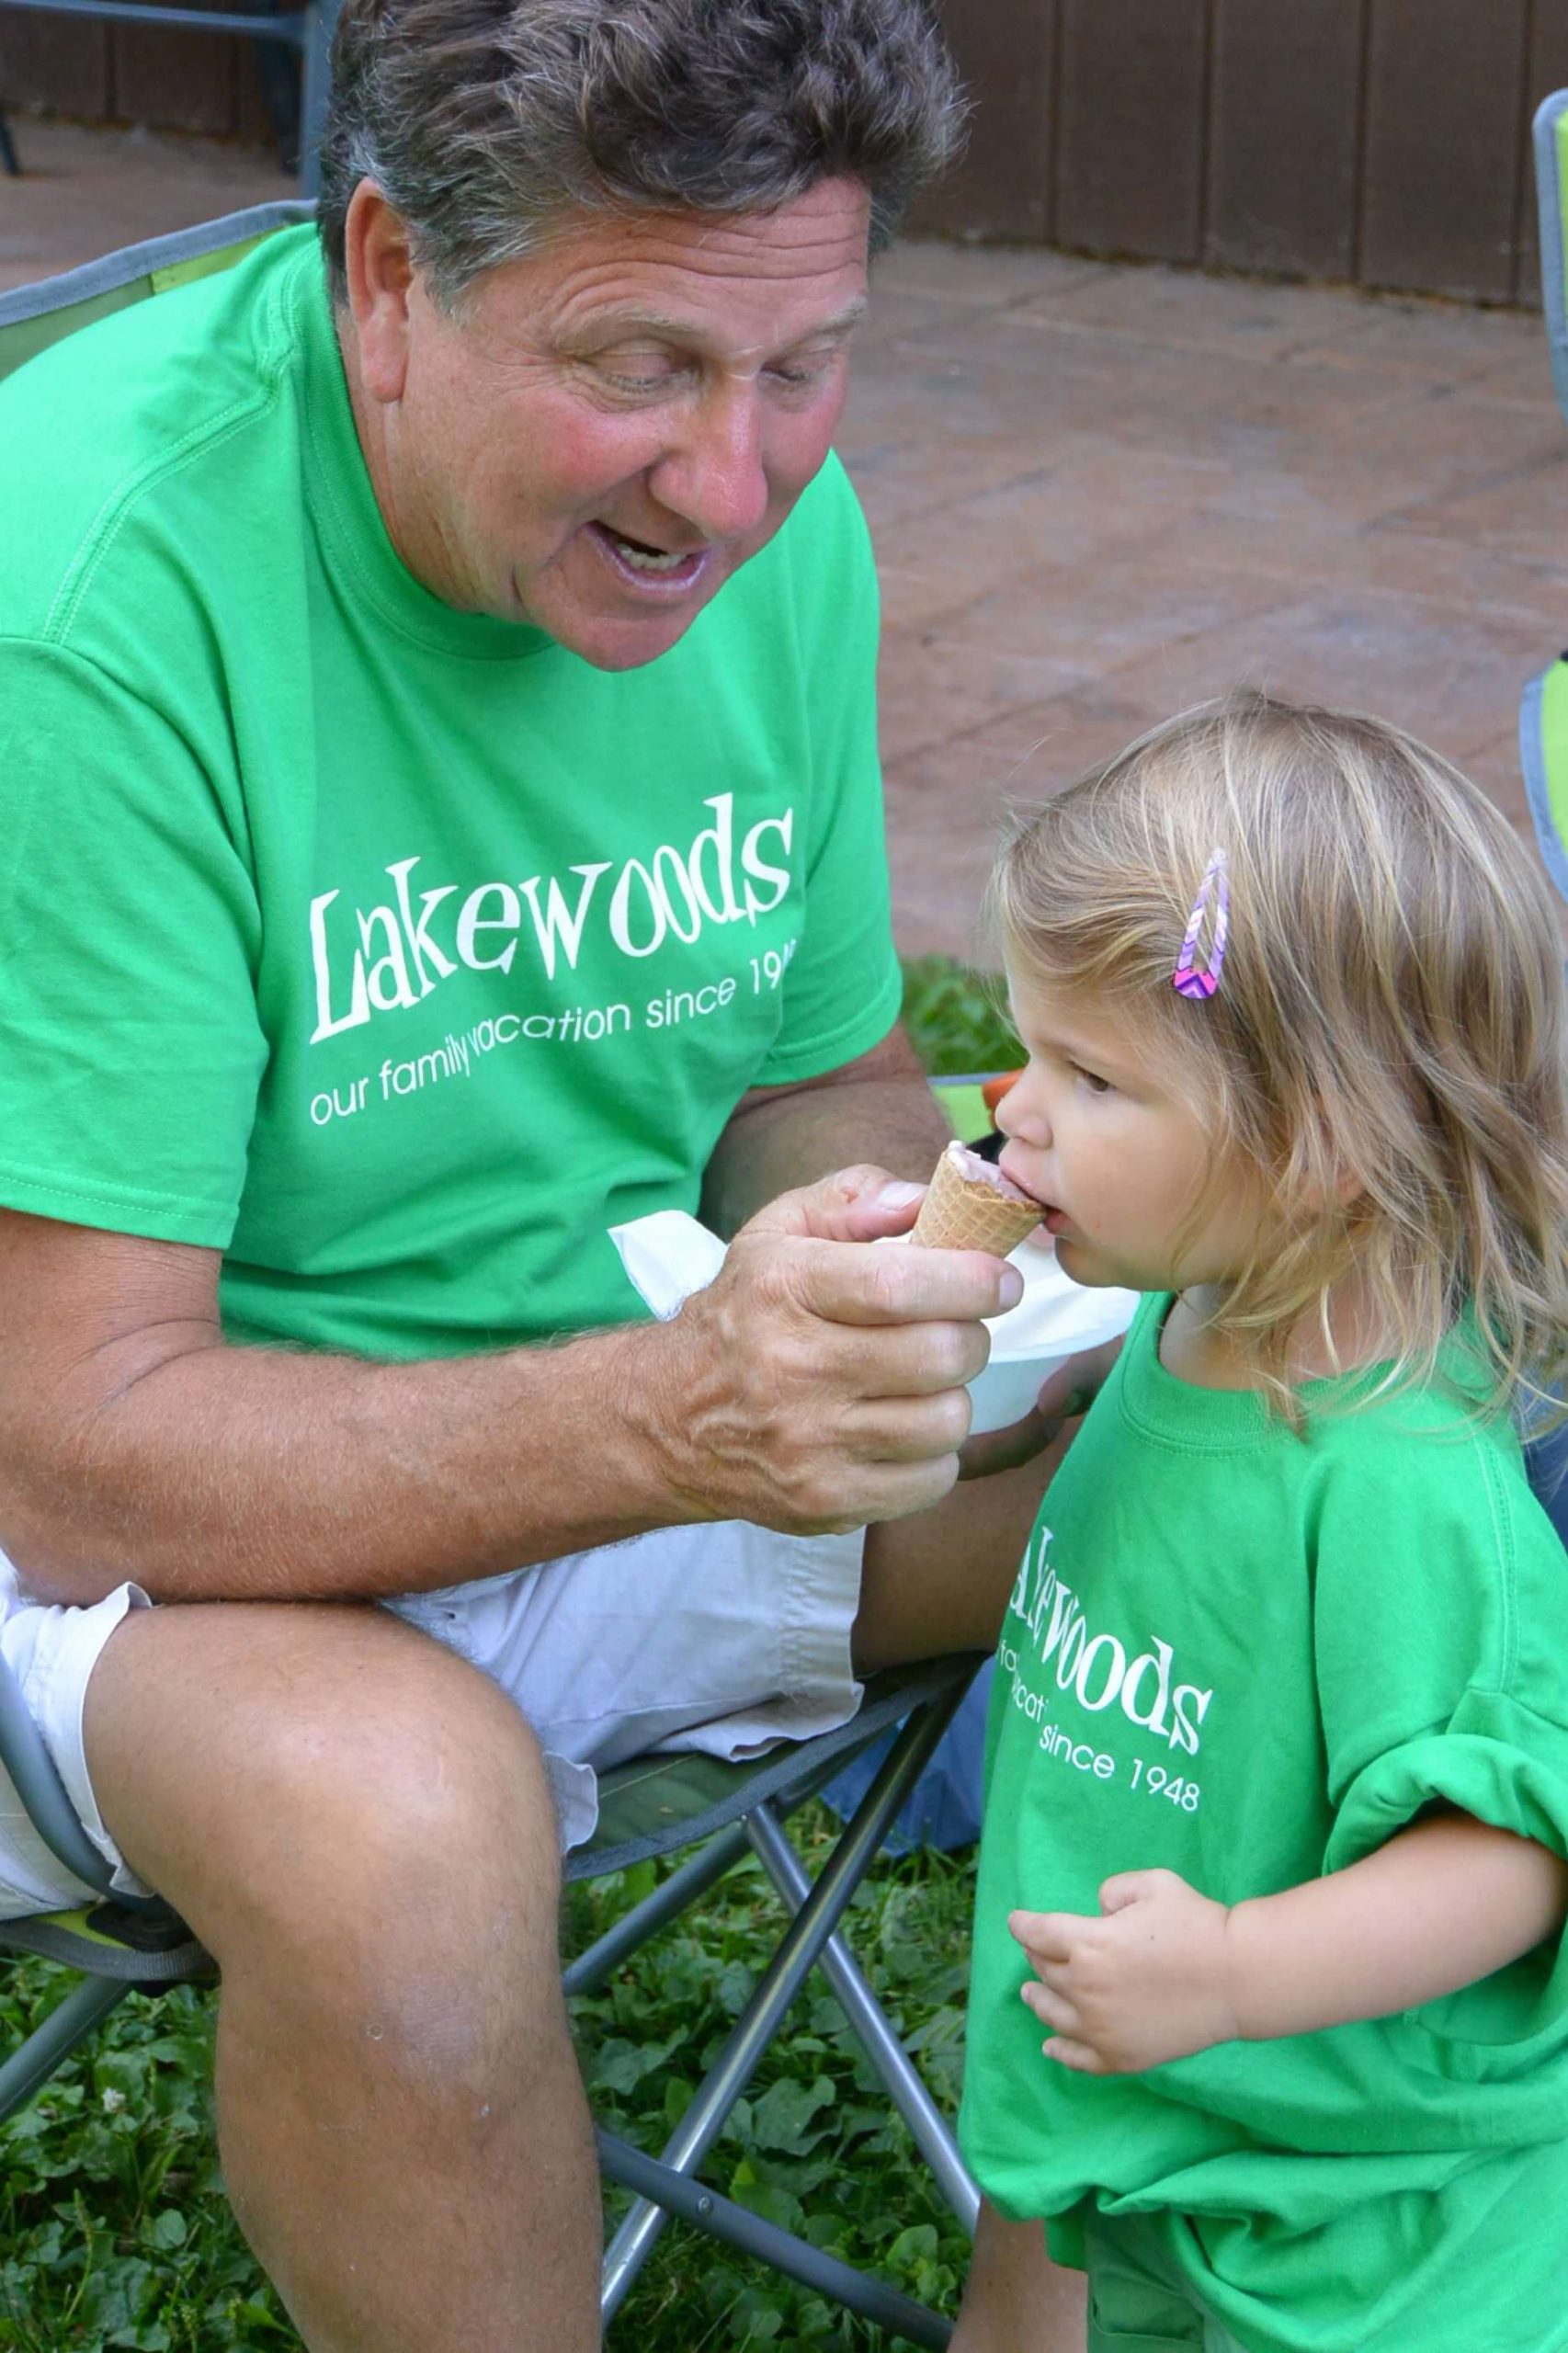 Grandparent letting a young girl try ice cream.